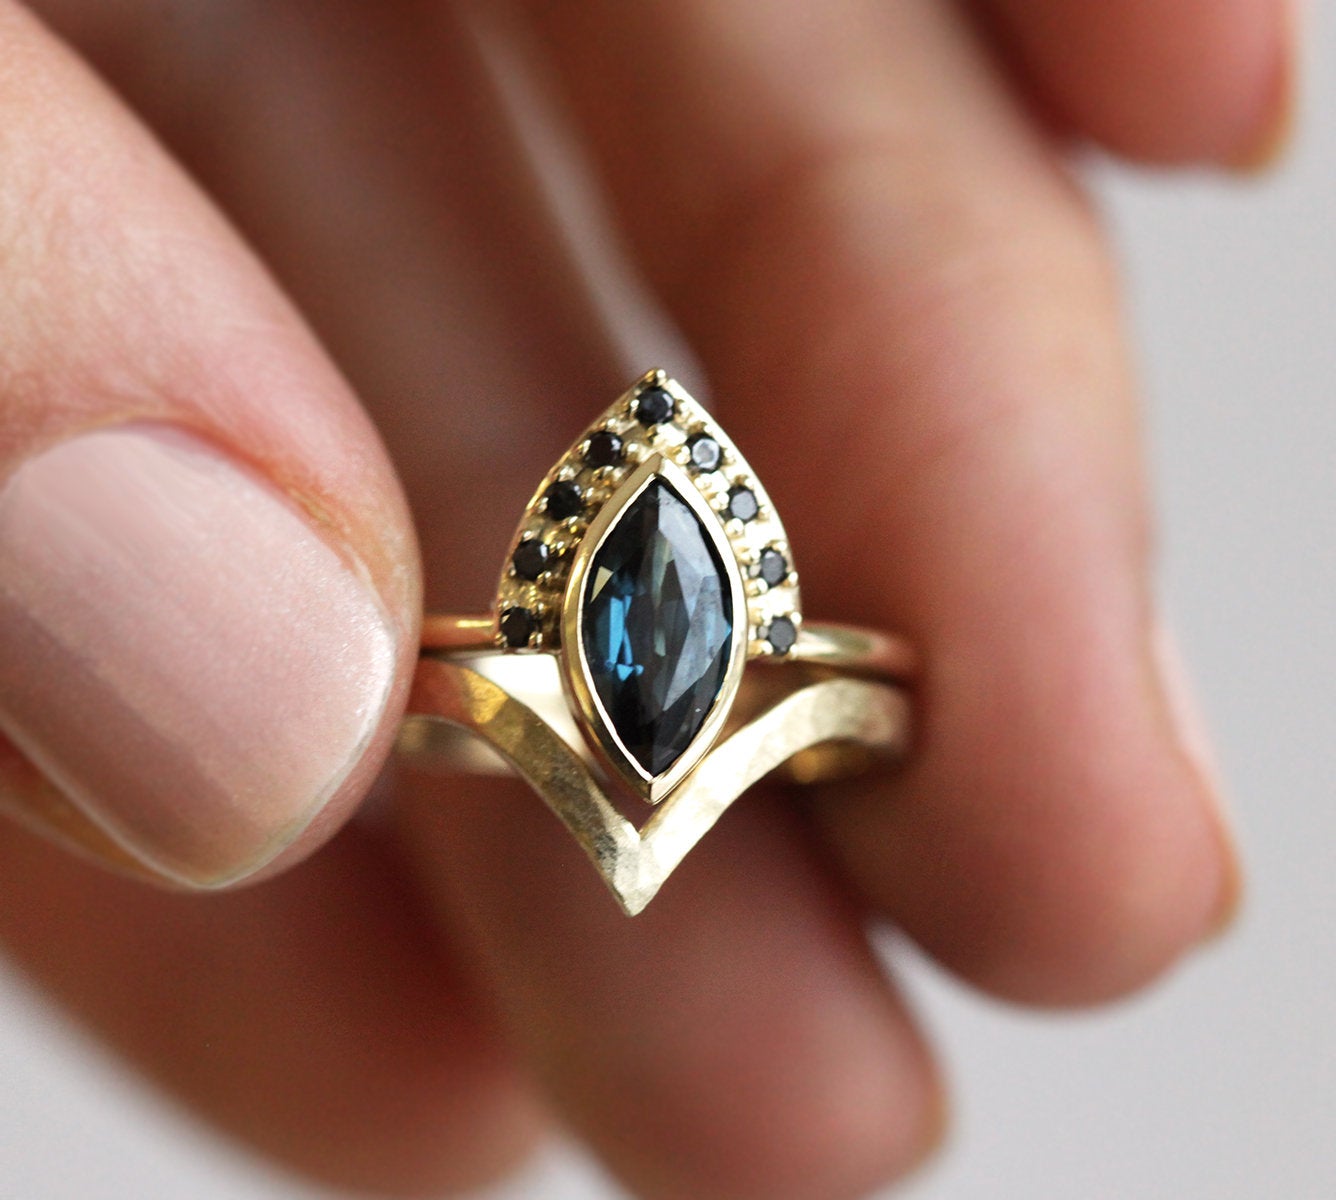 Blue marquise-shaped sapphire ring with diamond halo